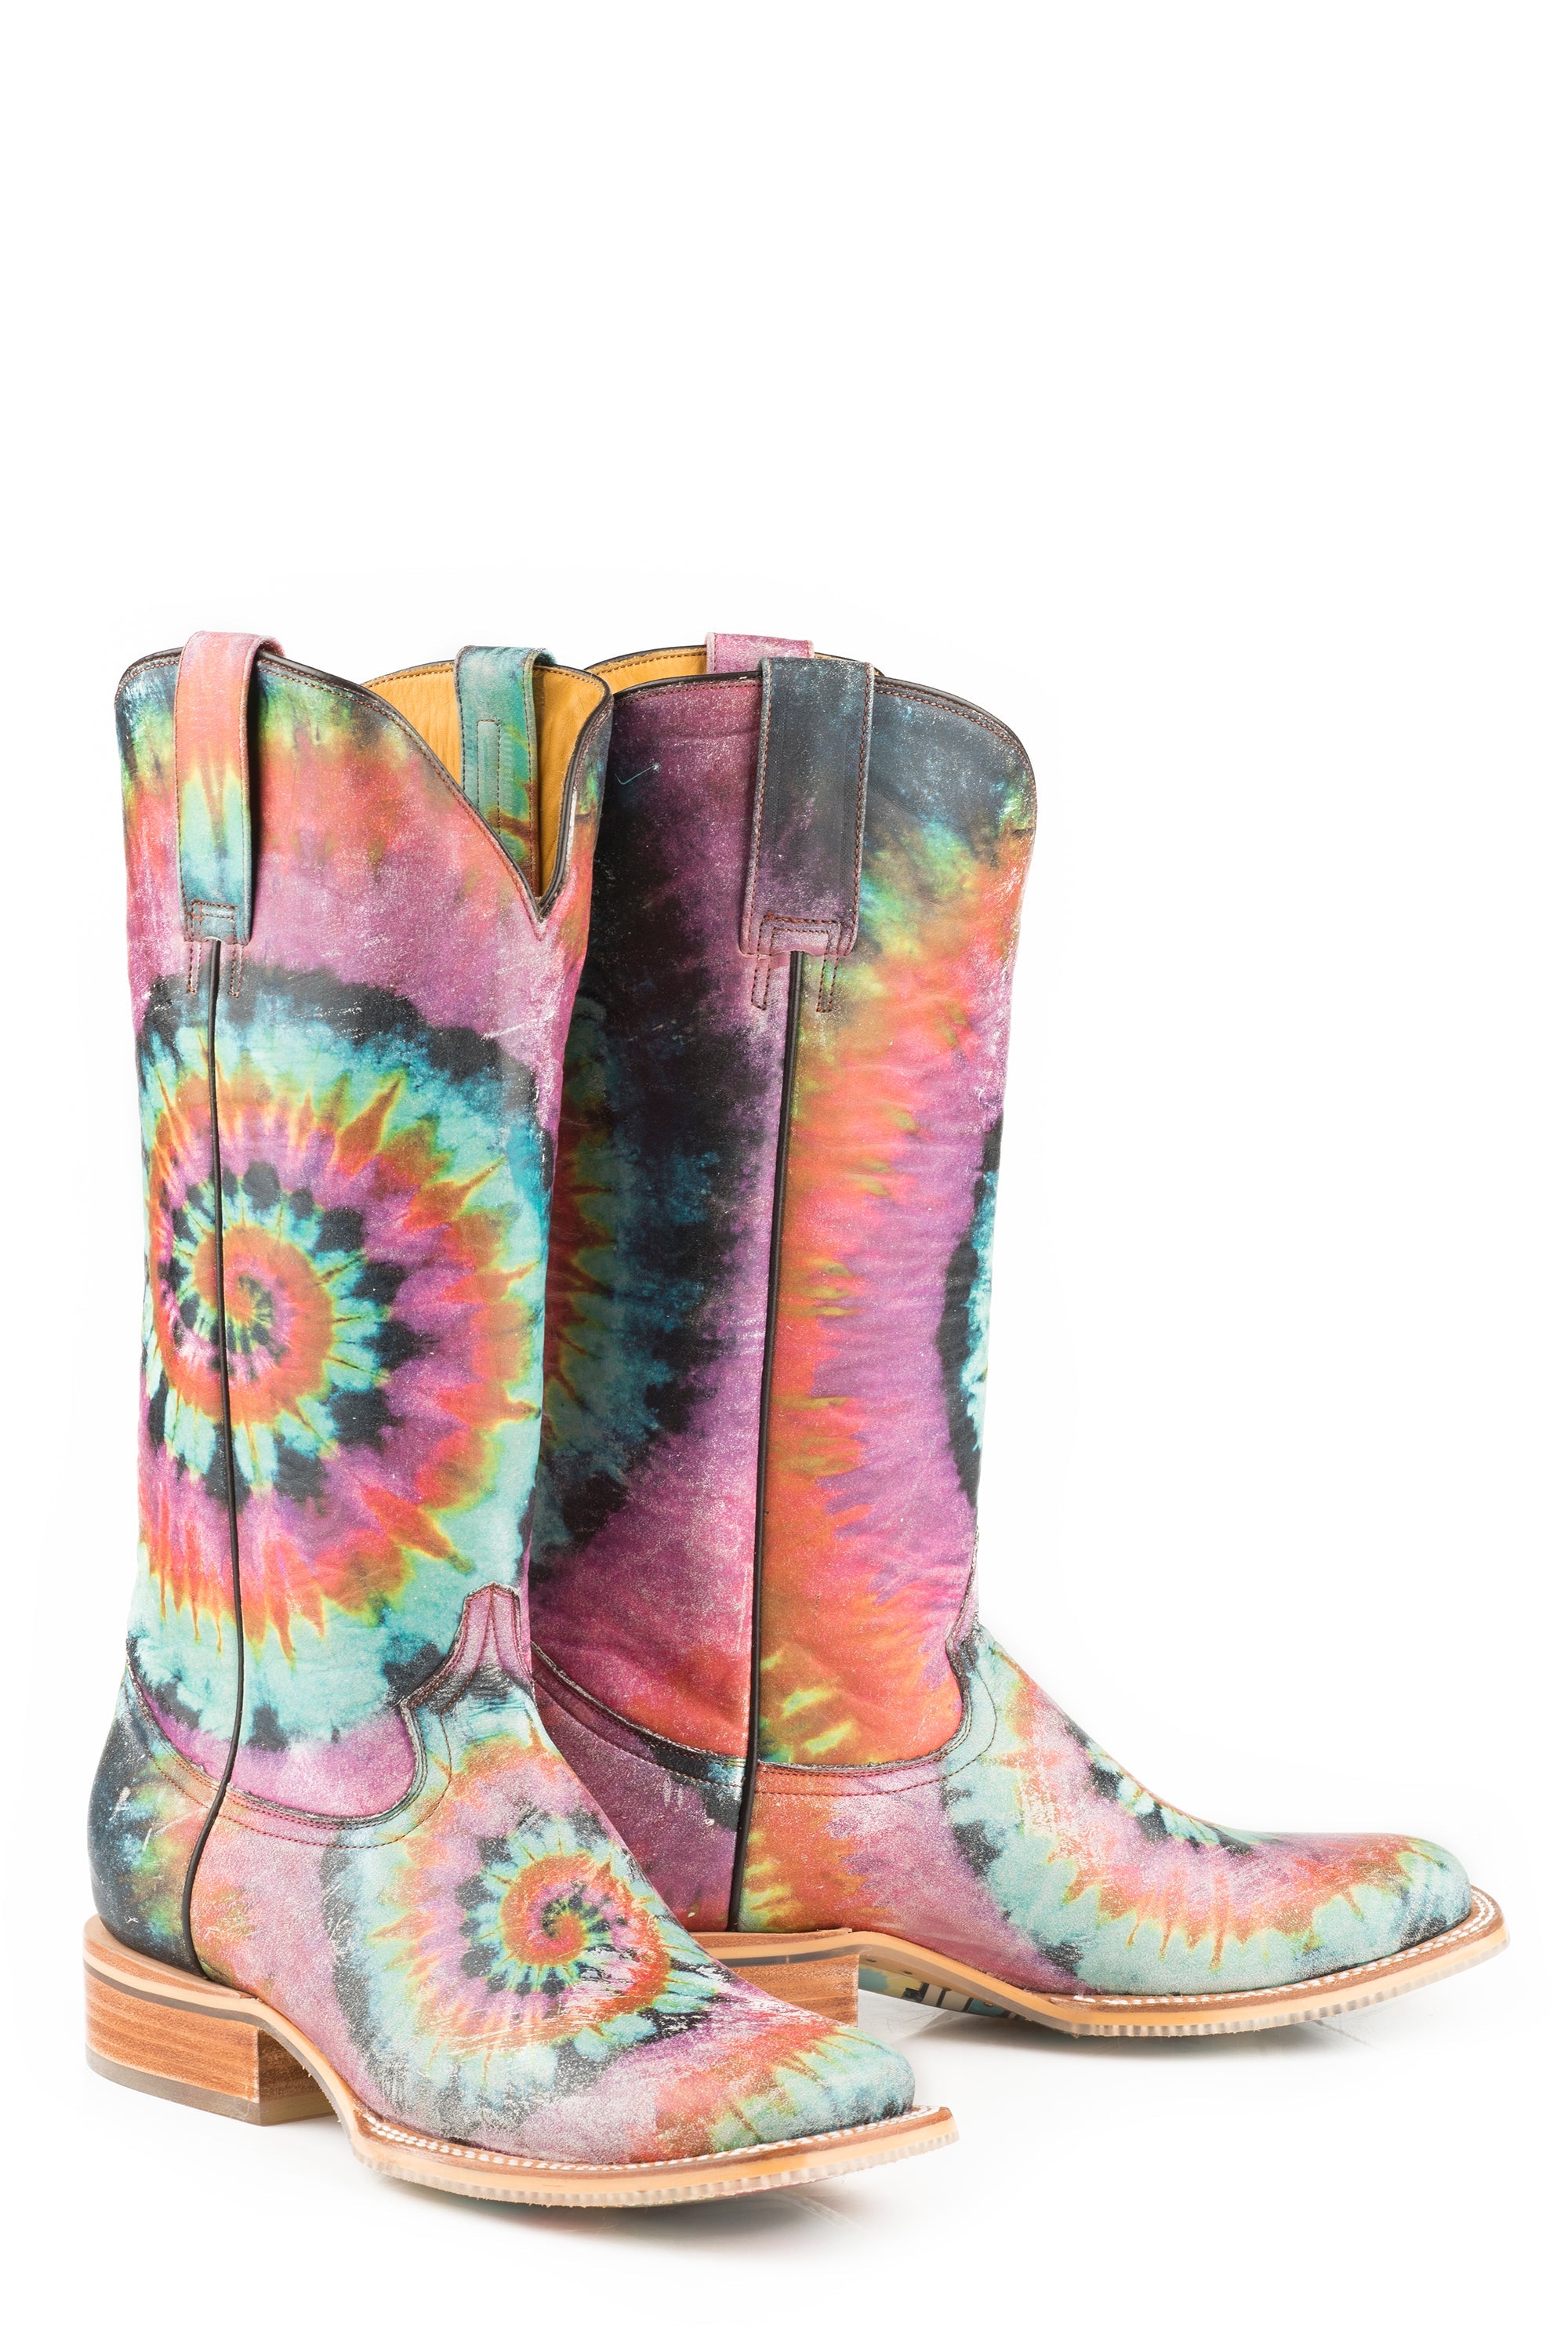 Tin Haul WOMENS GROOVY WITH TIE DYE CAMPER SOLE